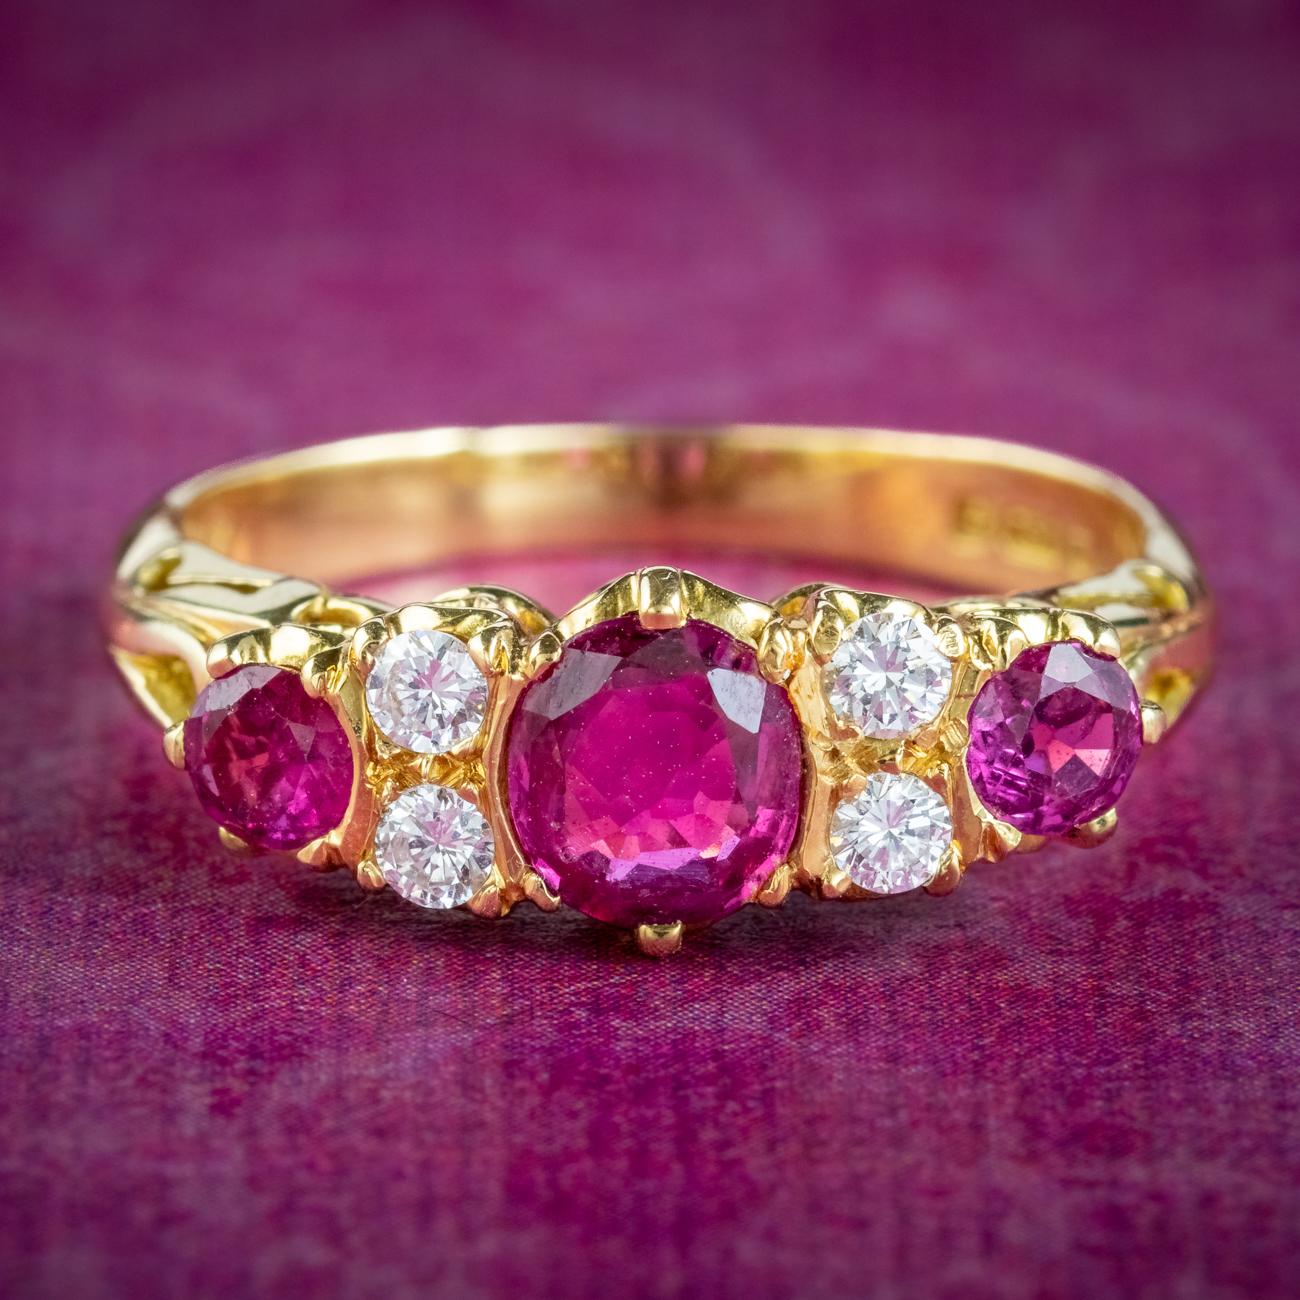 A gorgeous 1980s carved half hoop ring set with a trilogy of cherry-pink rubies which are accompanied by a detailed ruby report which indicates they’re of Thailand or East African origin and are all natural with some signs of heat treatment on the